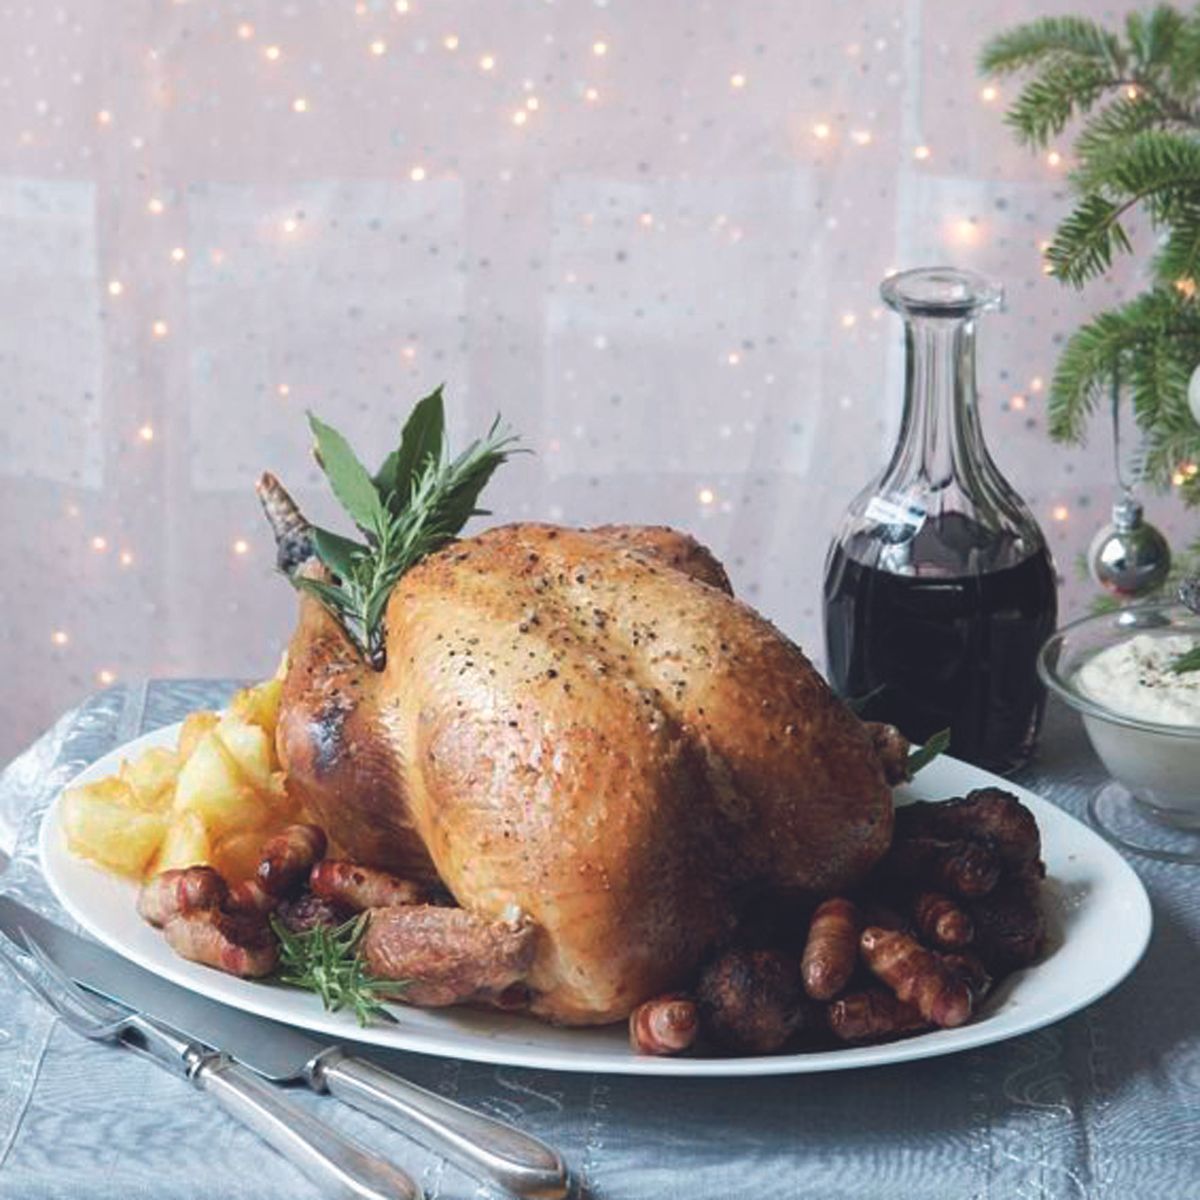 Don't be afraid of the Christmas turkey this year with our easy guide on making it perfect